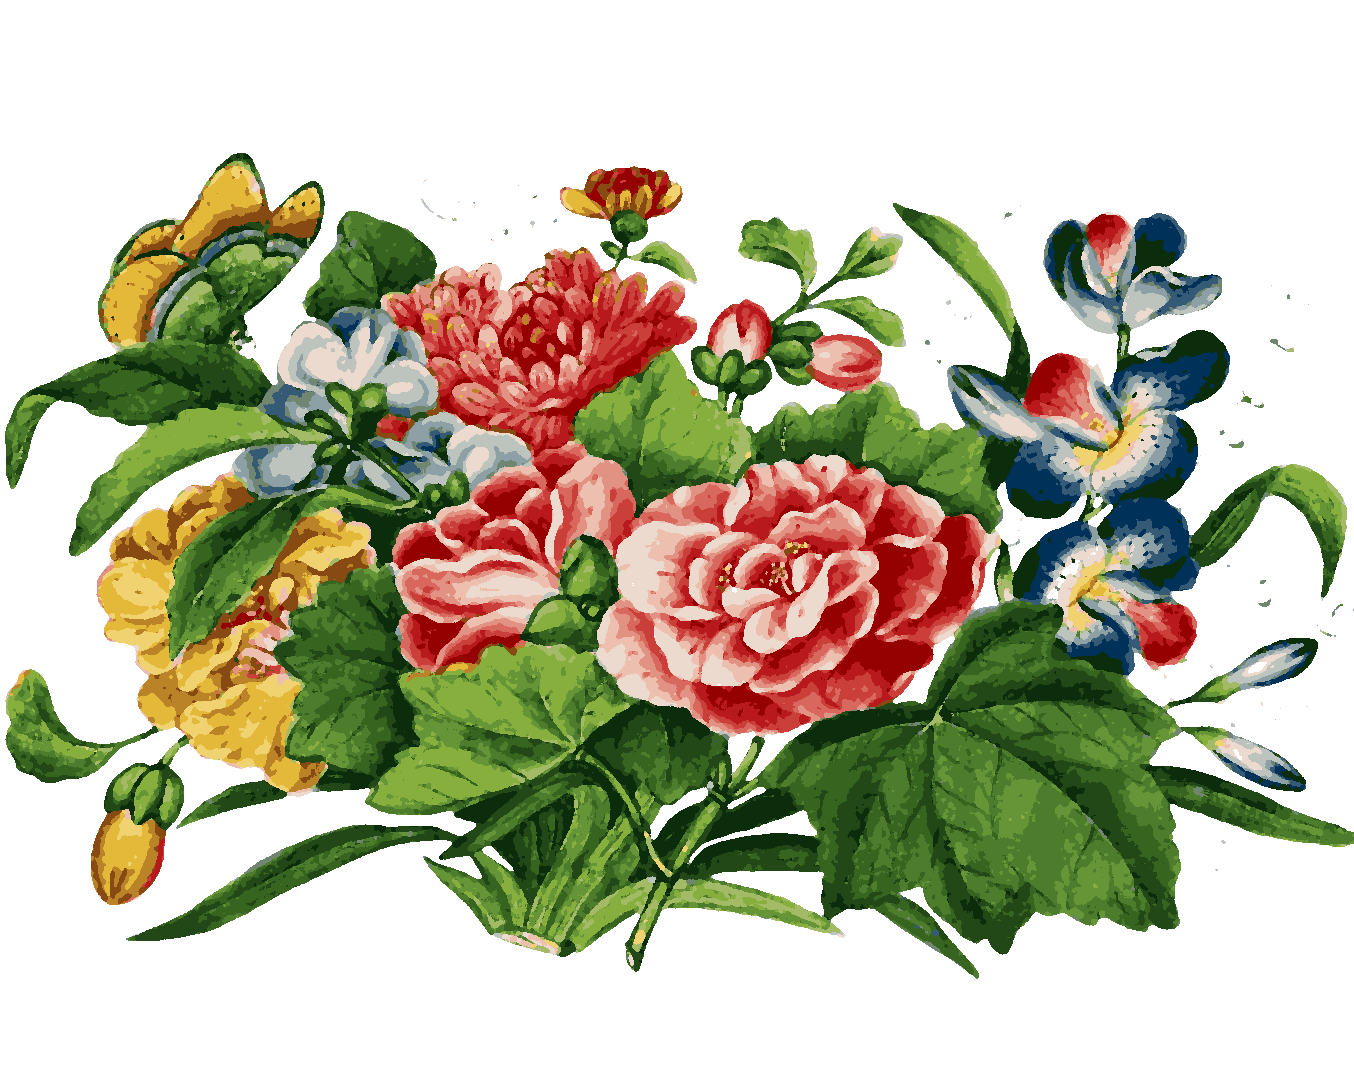 China Collection PD (8) - Chinese peony - Van-Go Paint-By-Number Kit